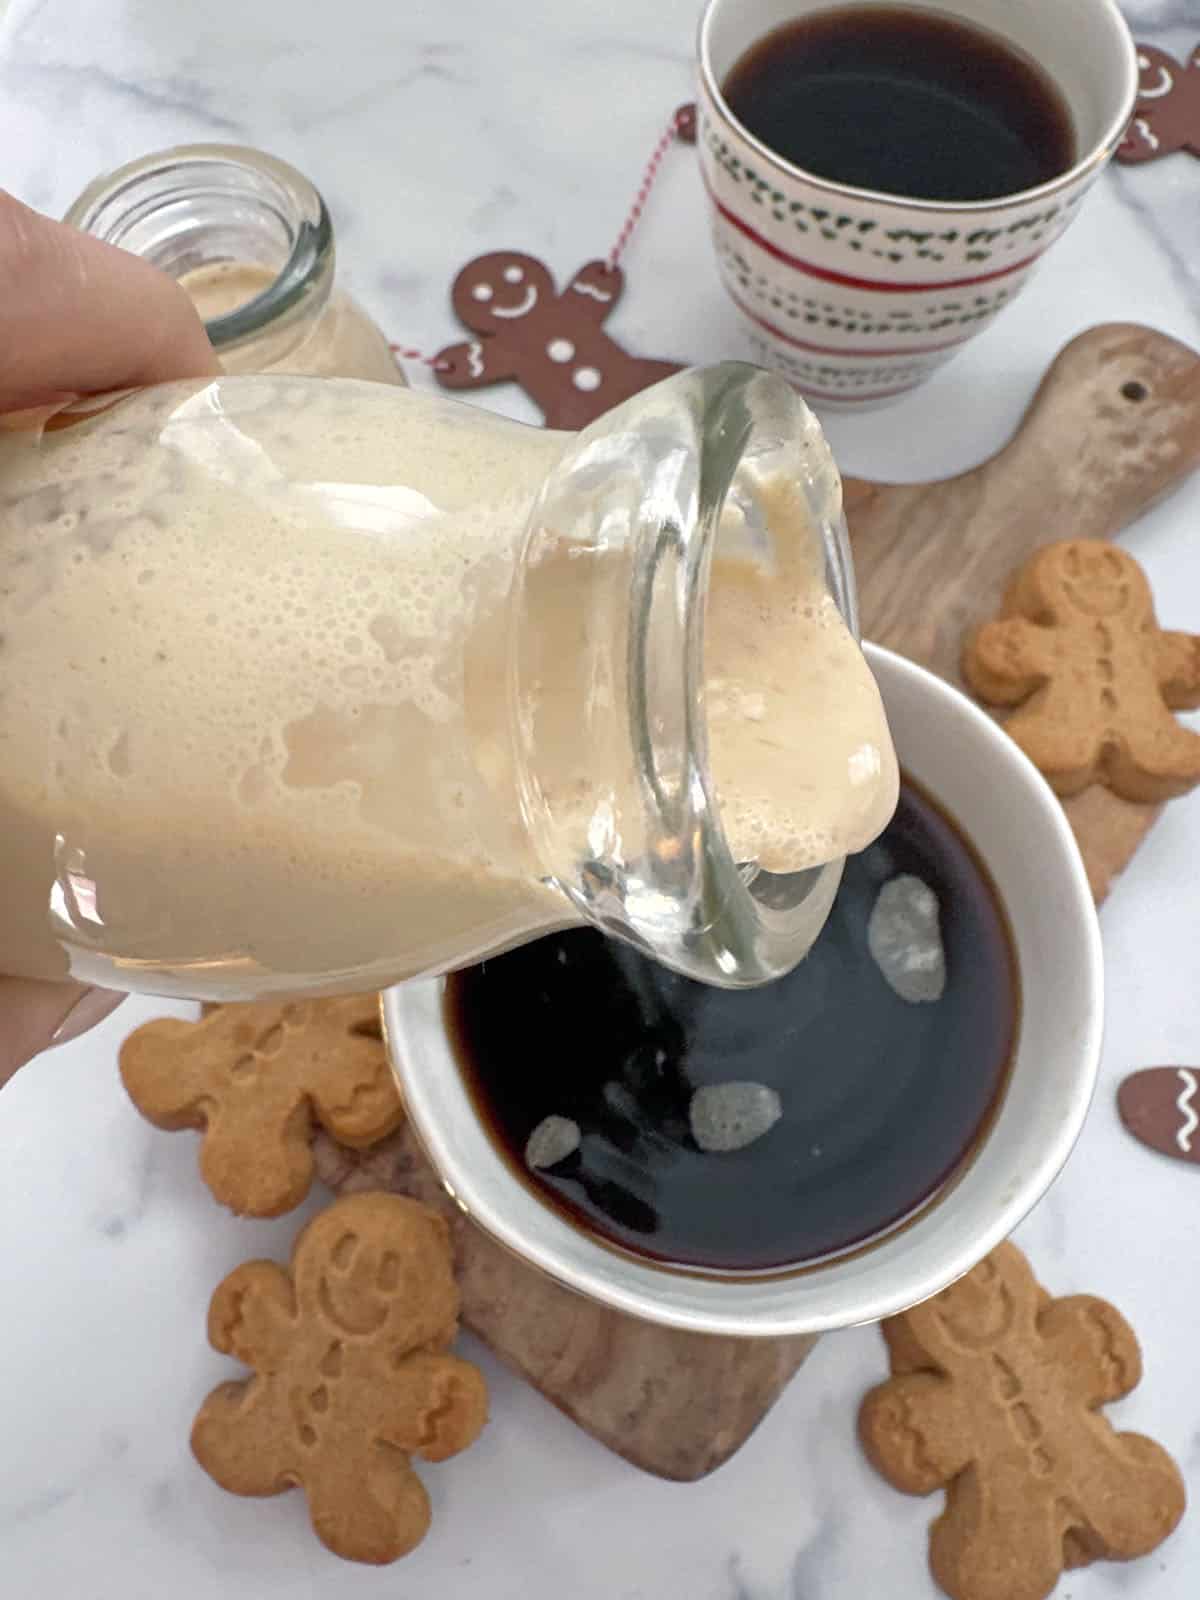 Overhead view of gingerbread coffee creamer being poured into a cup of black coffee with gingerbread men cookies all around.